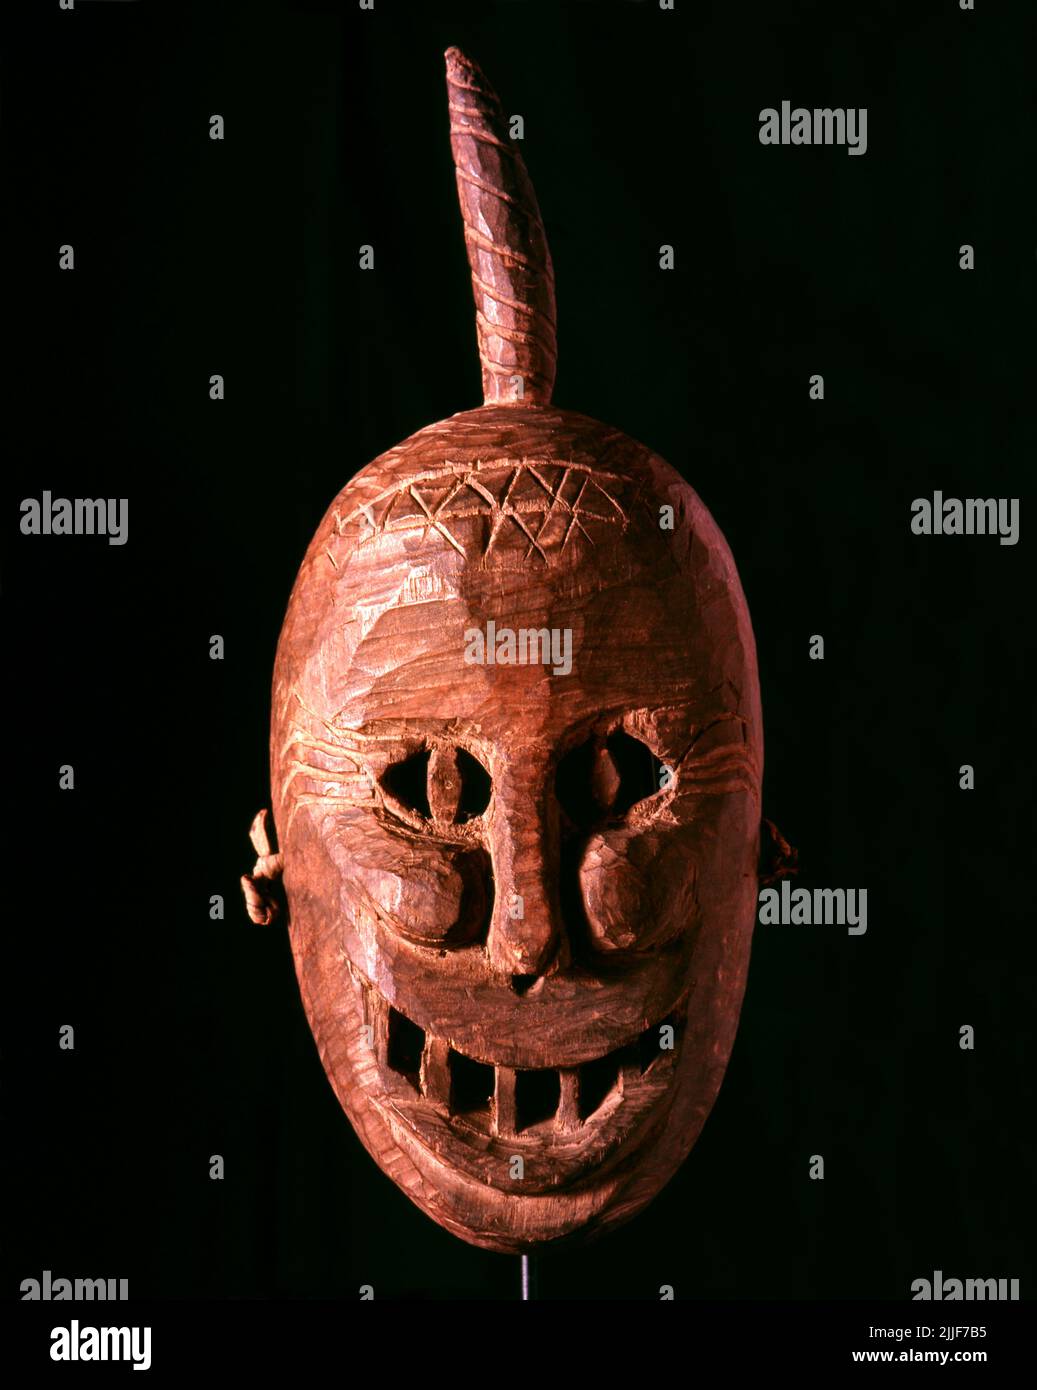 Thailand / China: Yao shaman's mask from northern Thailand. The Yao nationality (its great majority branch is also known as Mien) is a government classification for various minorities in China. They form one of the 55 ethnic minority groups officially recognized by the People's Republic of China, where they reside in the mountainous terrain of the southwest and south. They also form one of the 54 ethnic groups officially recognized by Vietnam. In the last census, they numbered 2,637,421 in China, and roughly 470,000 in Vietnam. In Thailand they number 40,000 and in Laos 20,000. Stock Photo